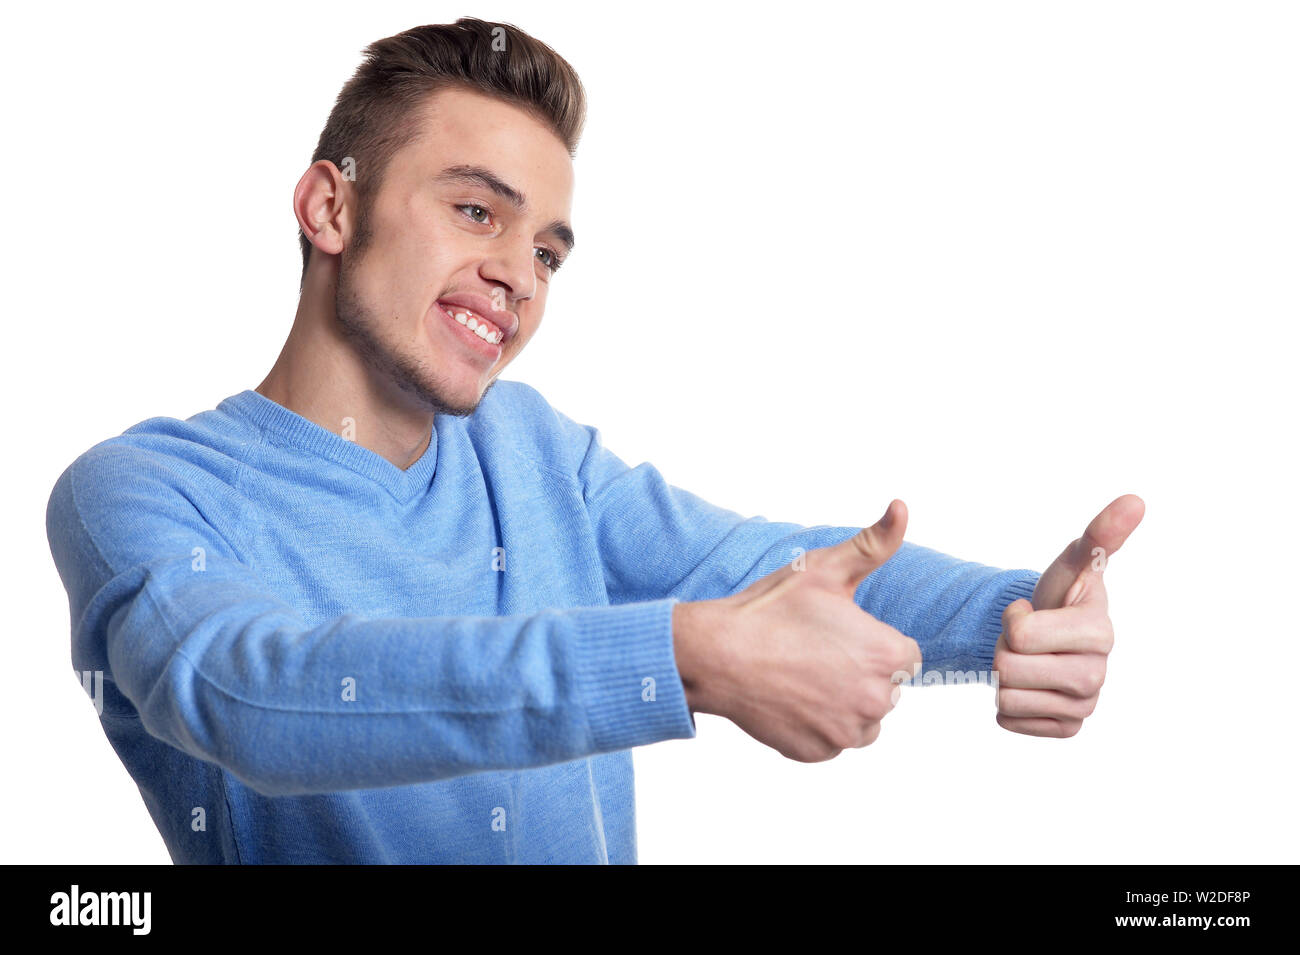 Portrait of handsome man thumbs up isolated Stock Photo